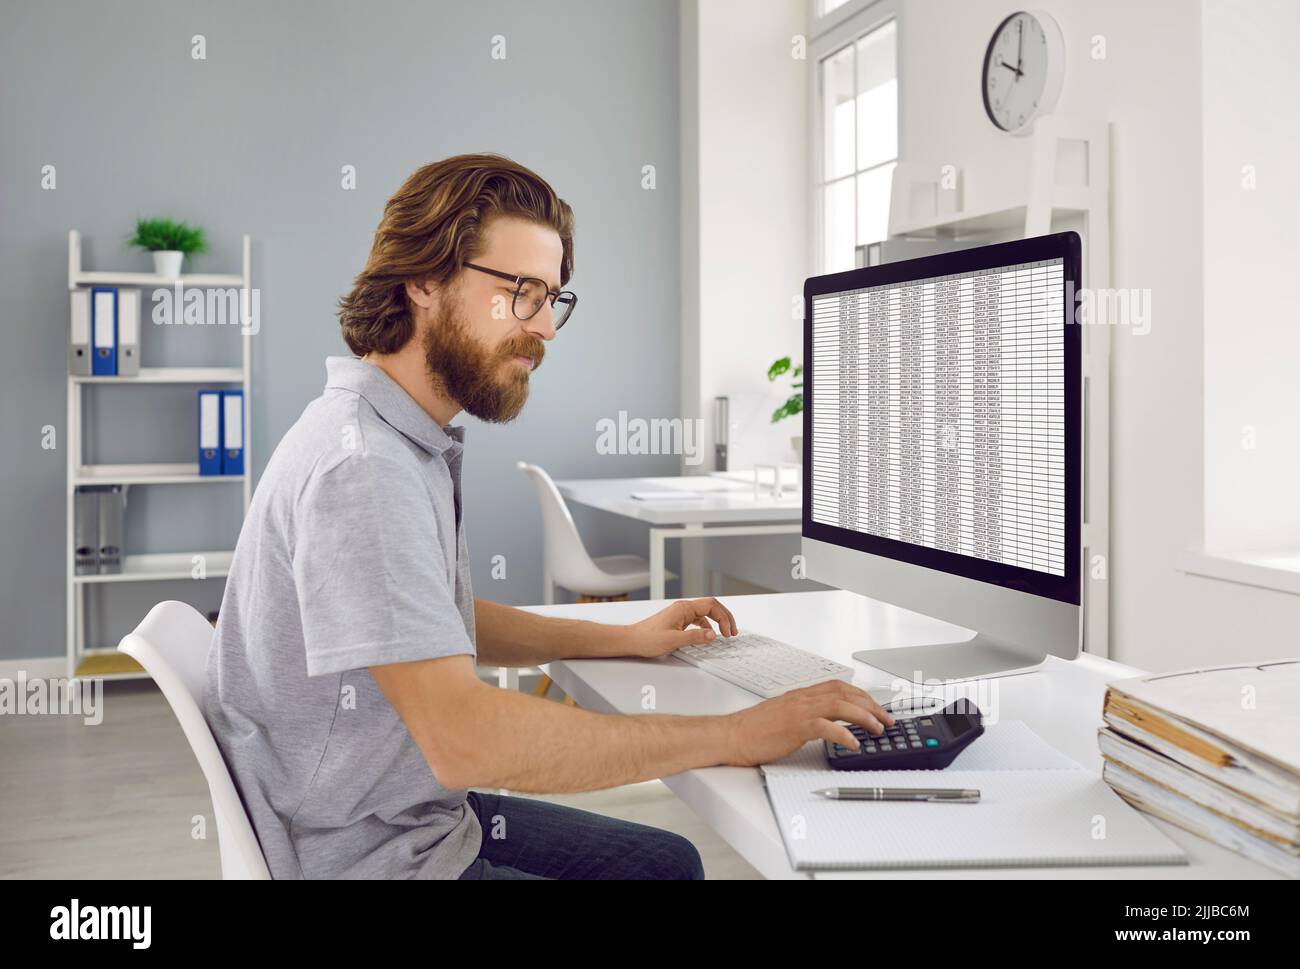 Business accountant sitting at office computer, working with spreadsheets and using calculator Stock Photo